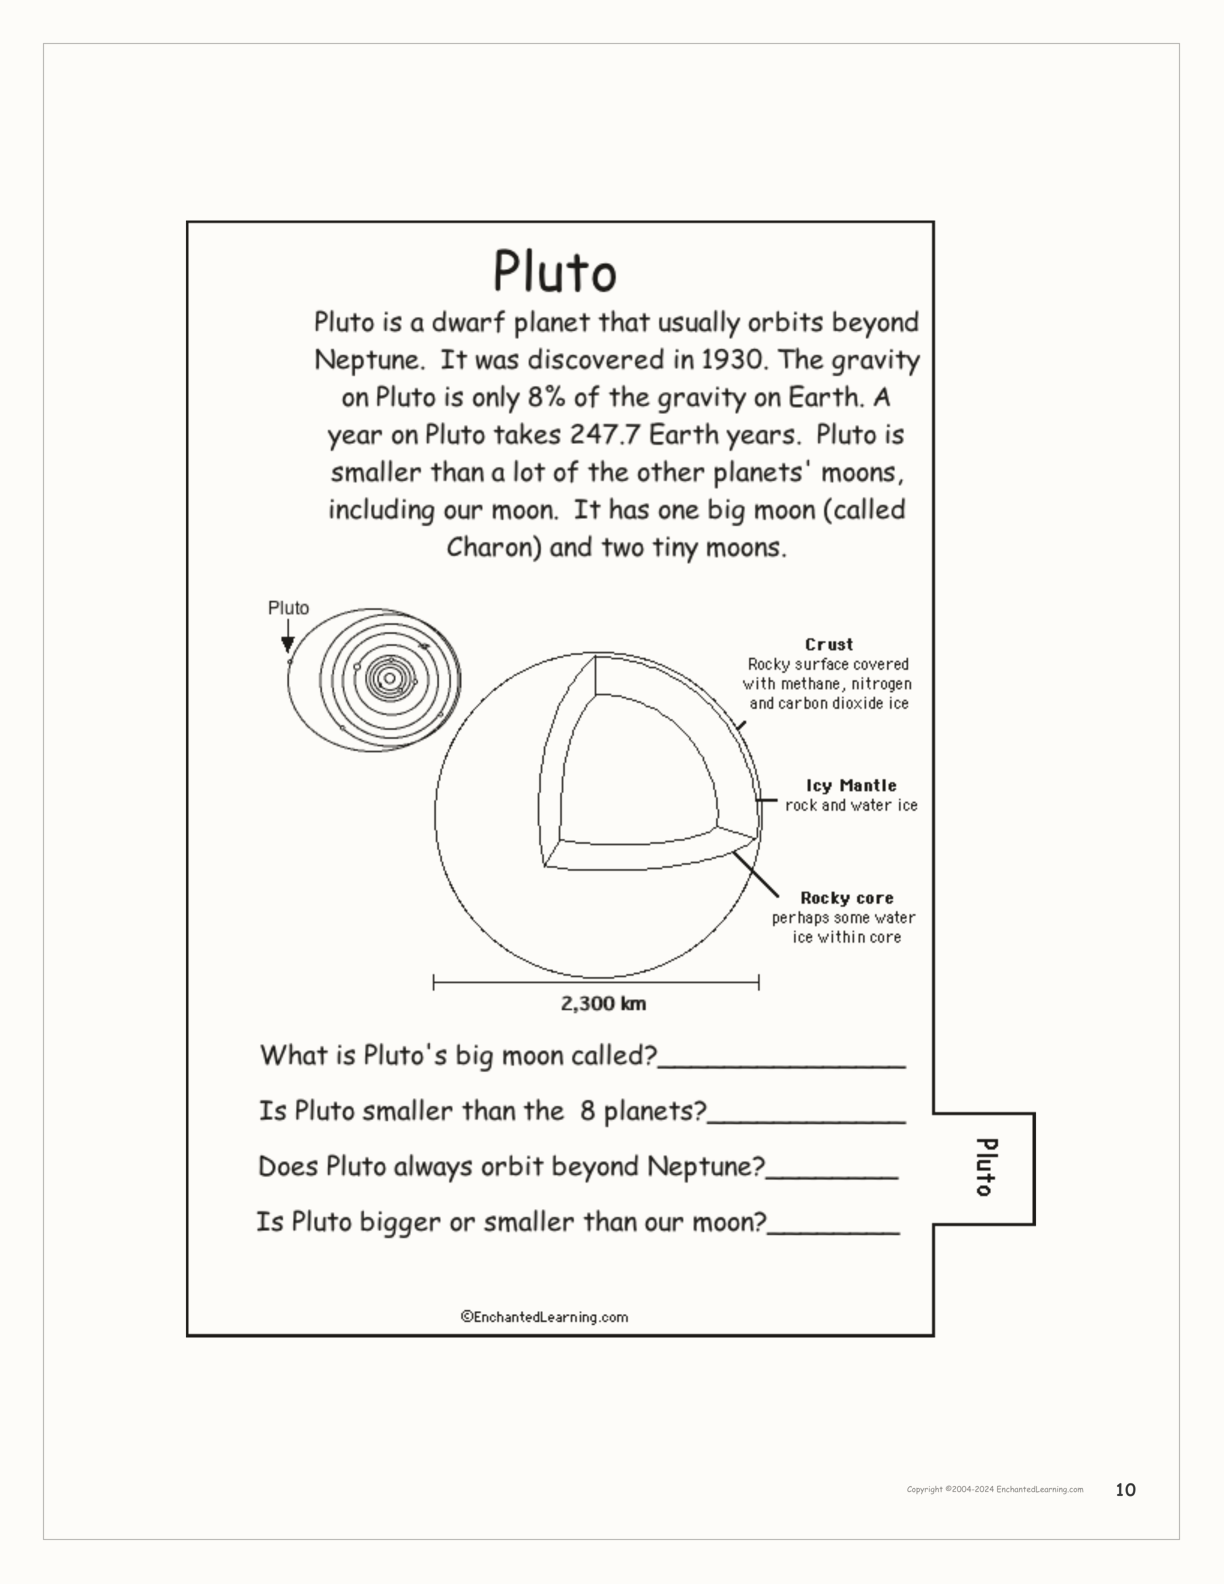 The Planets of our Solar System Book interactive printout page 10